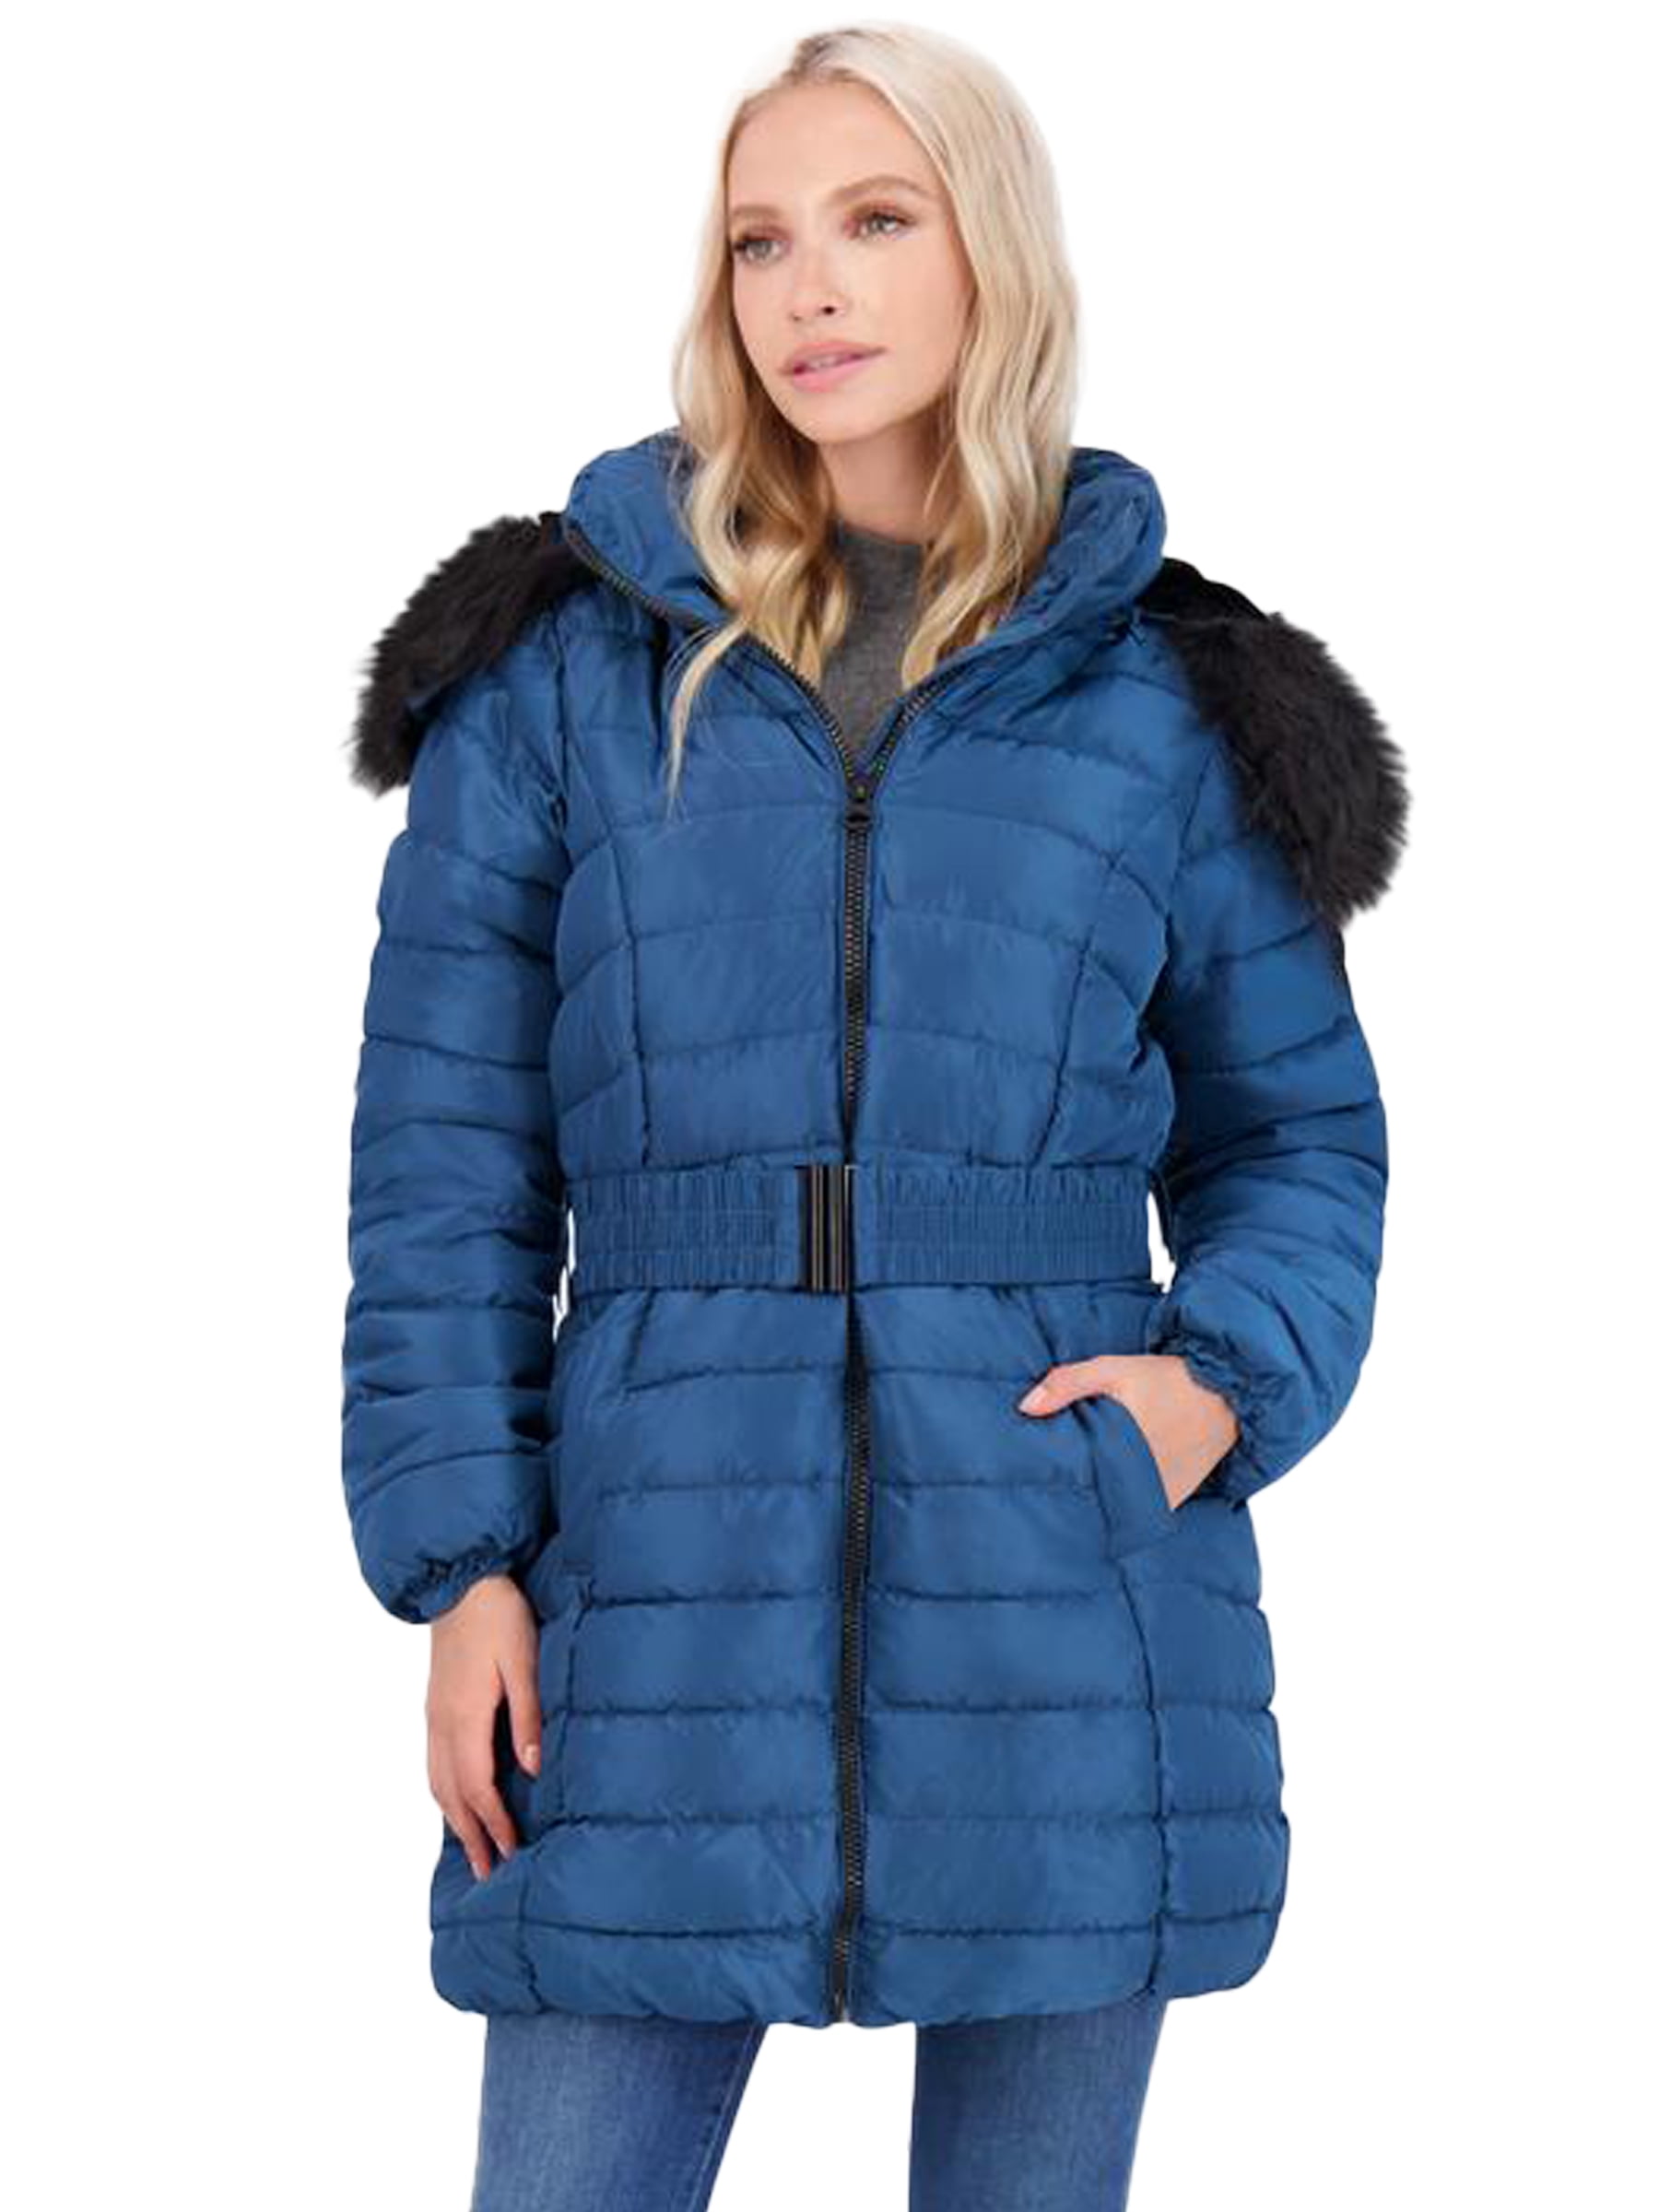 Womens Ladies Quilted Winter Coat Puffer Fur Collar Hooded Jacket Parka Size 